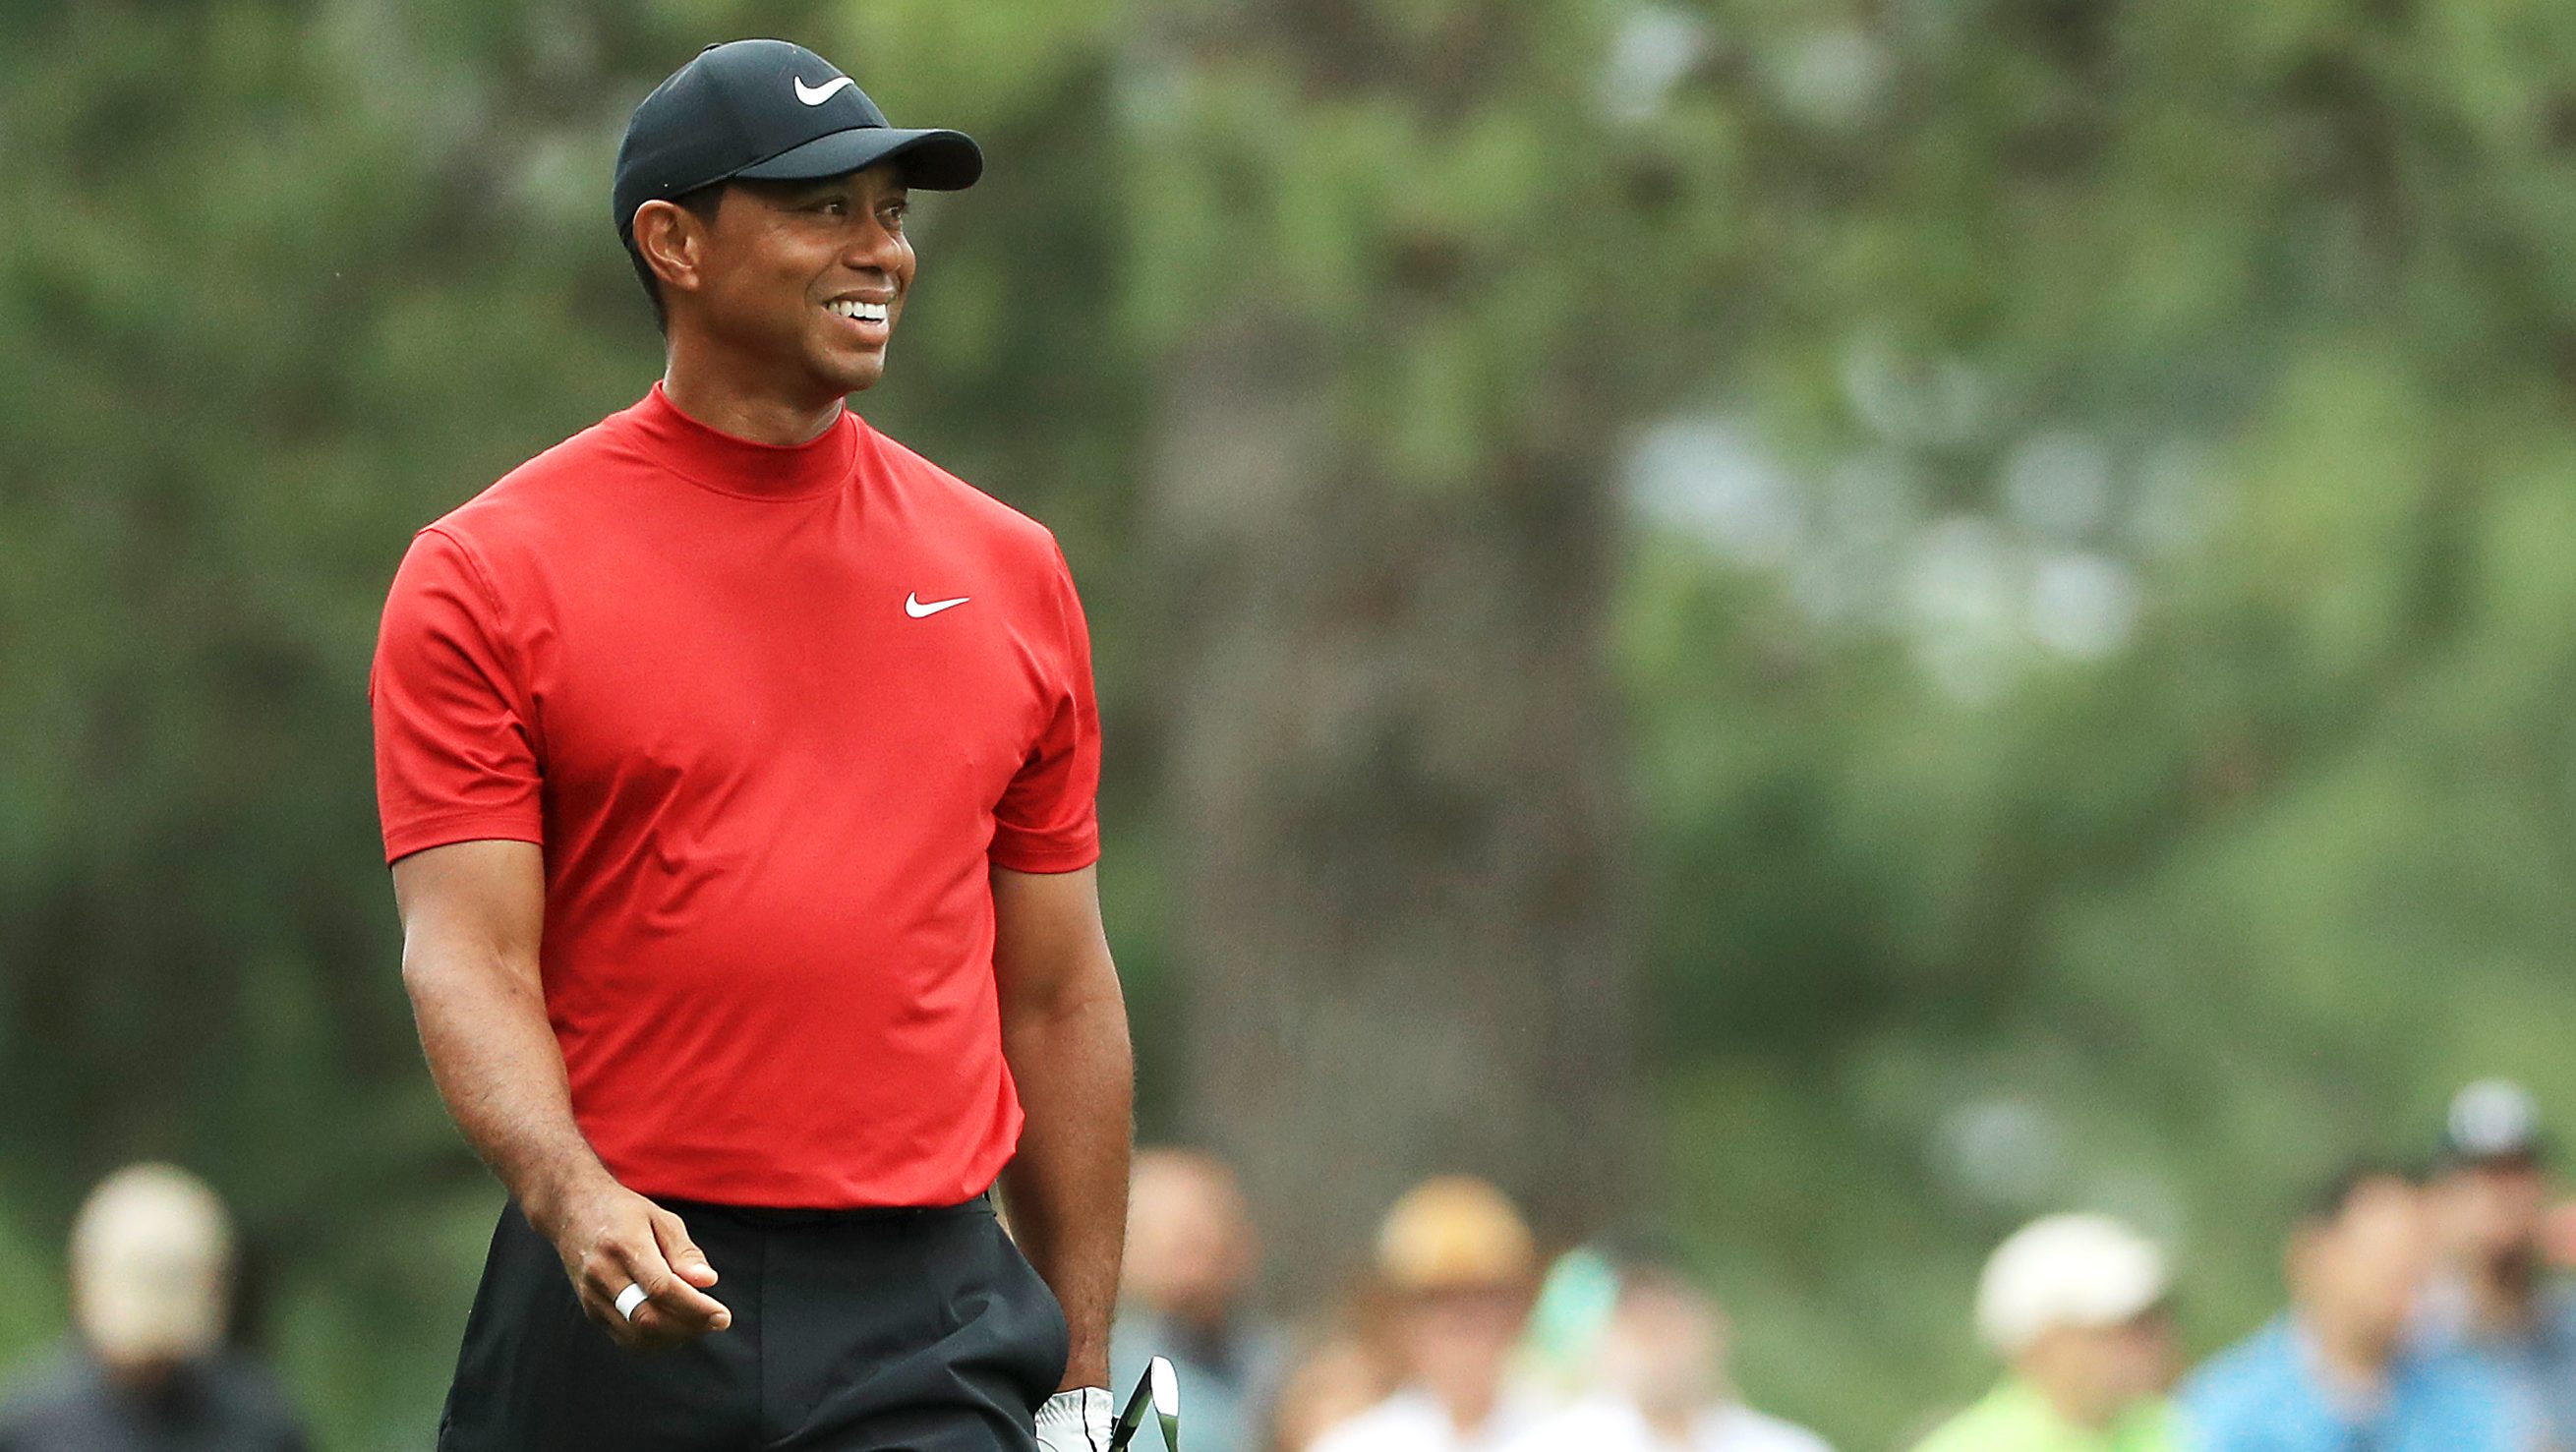 Tiger Woods & Masters When Did He Last Win a Major?